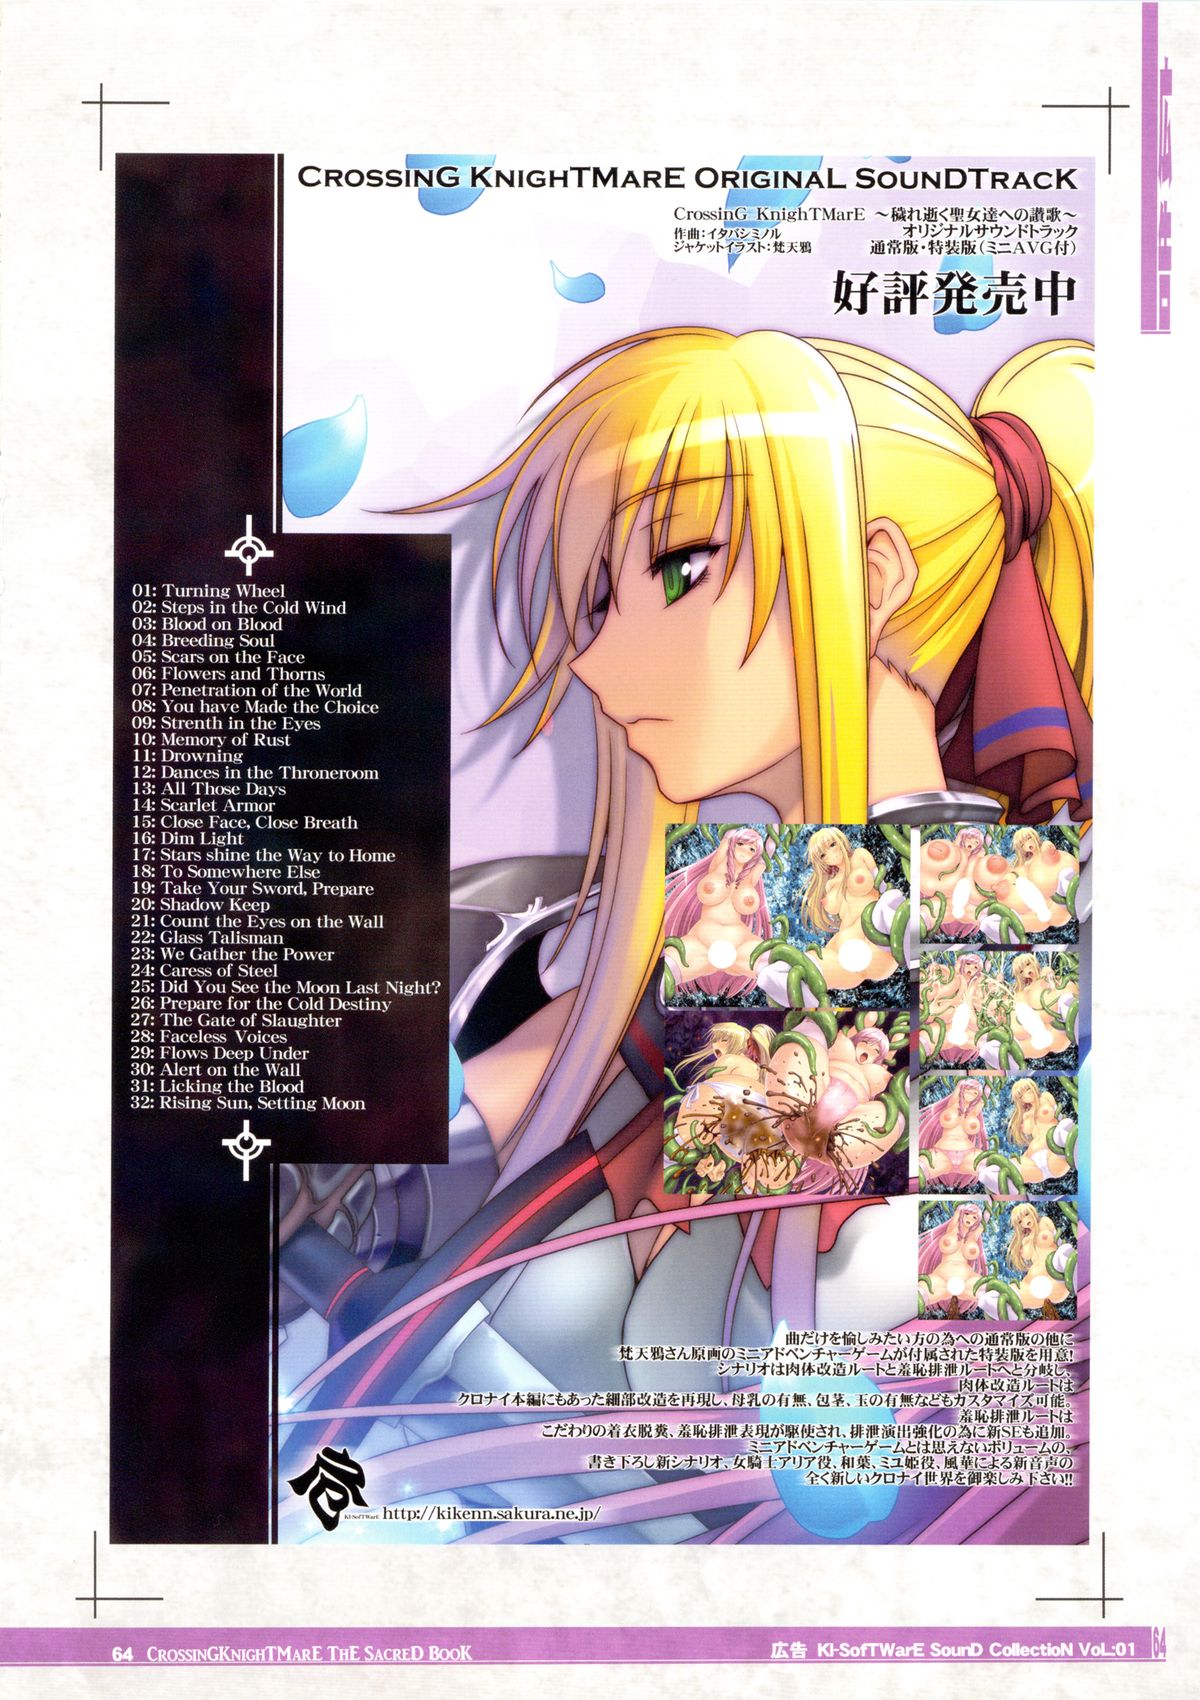 (C85) [KI-SofTWarE (エレクトさわる, 検見川もんど, 電気将軍 他)] CrossinG KnighTMarE ThE SacreD BooK